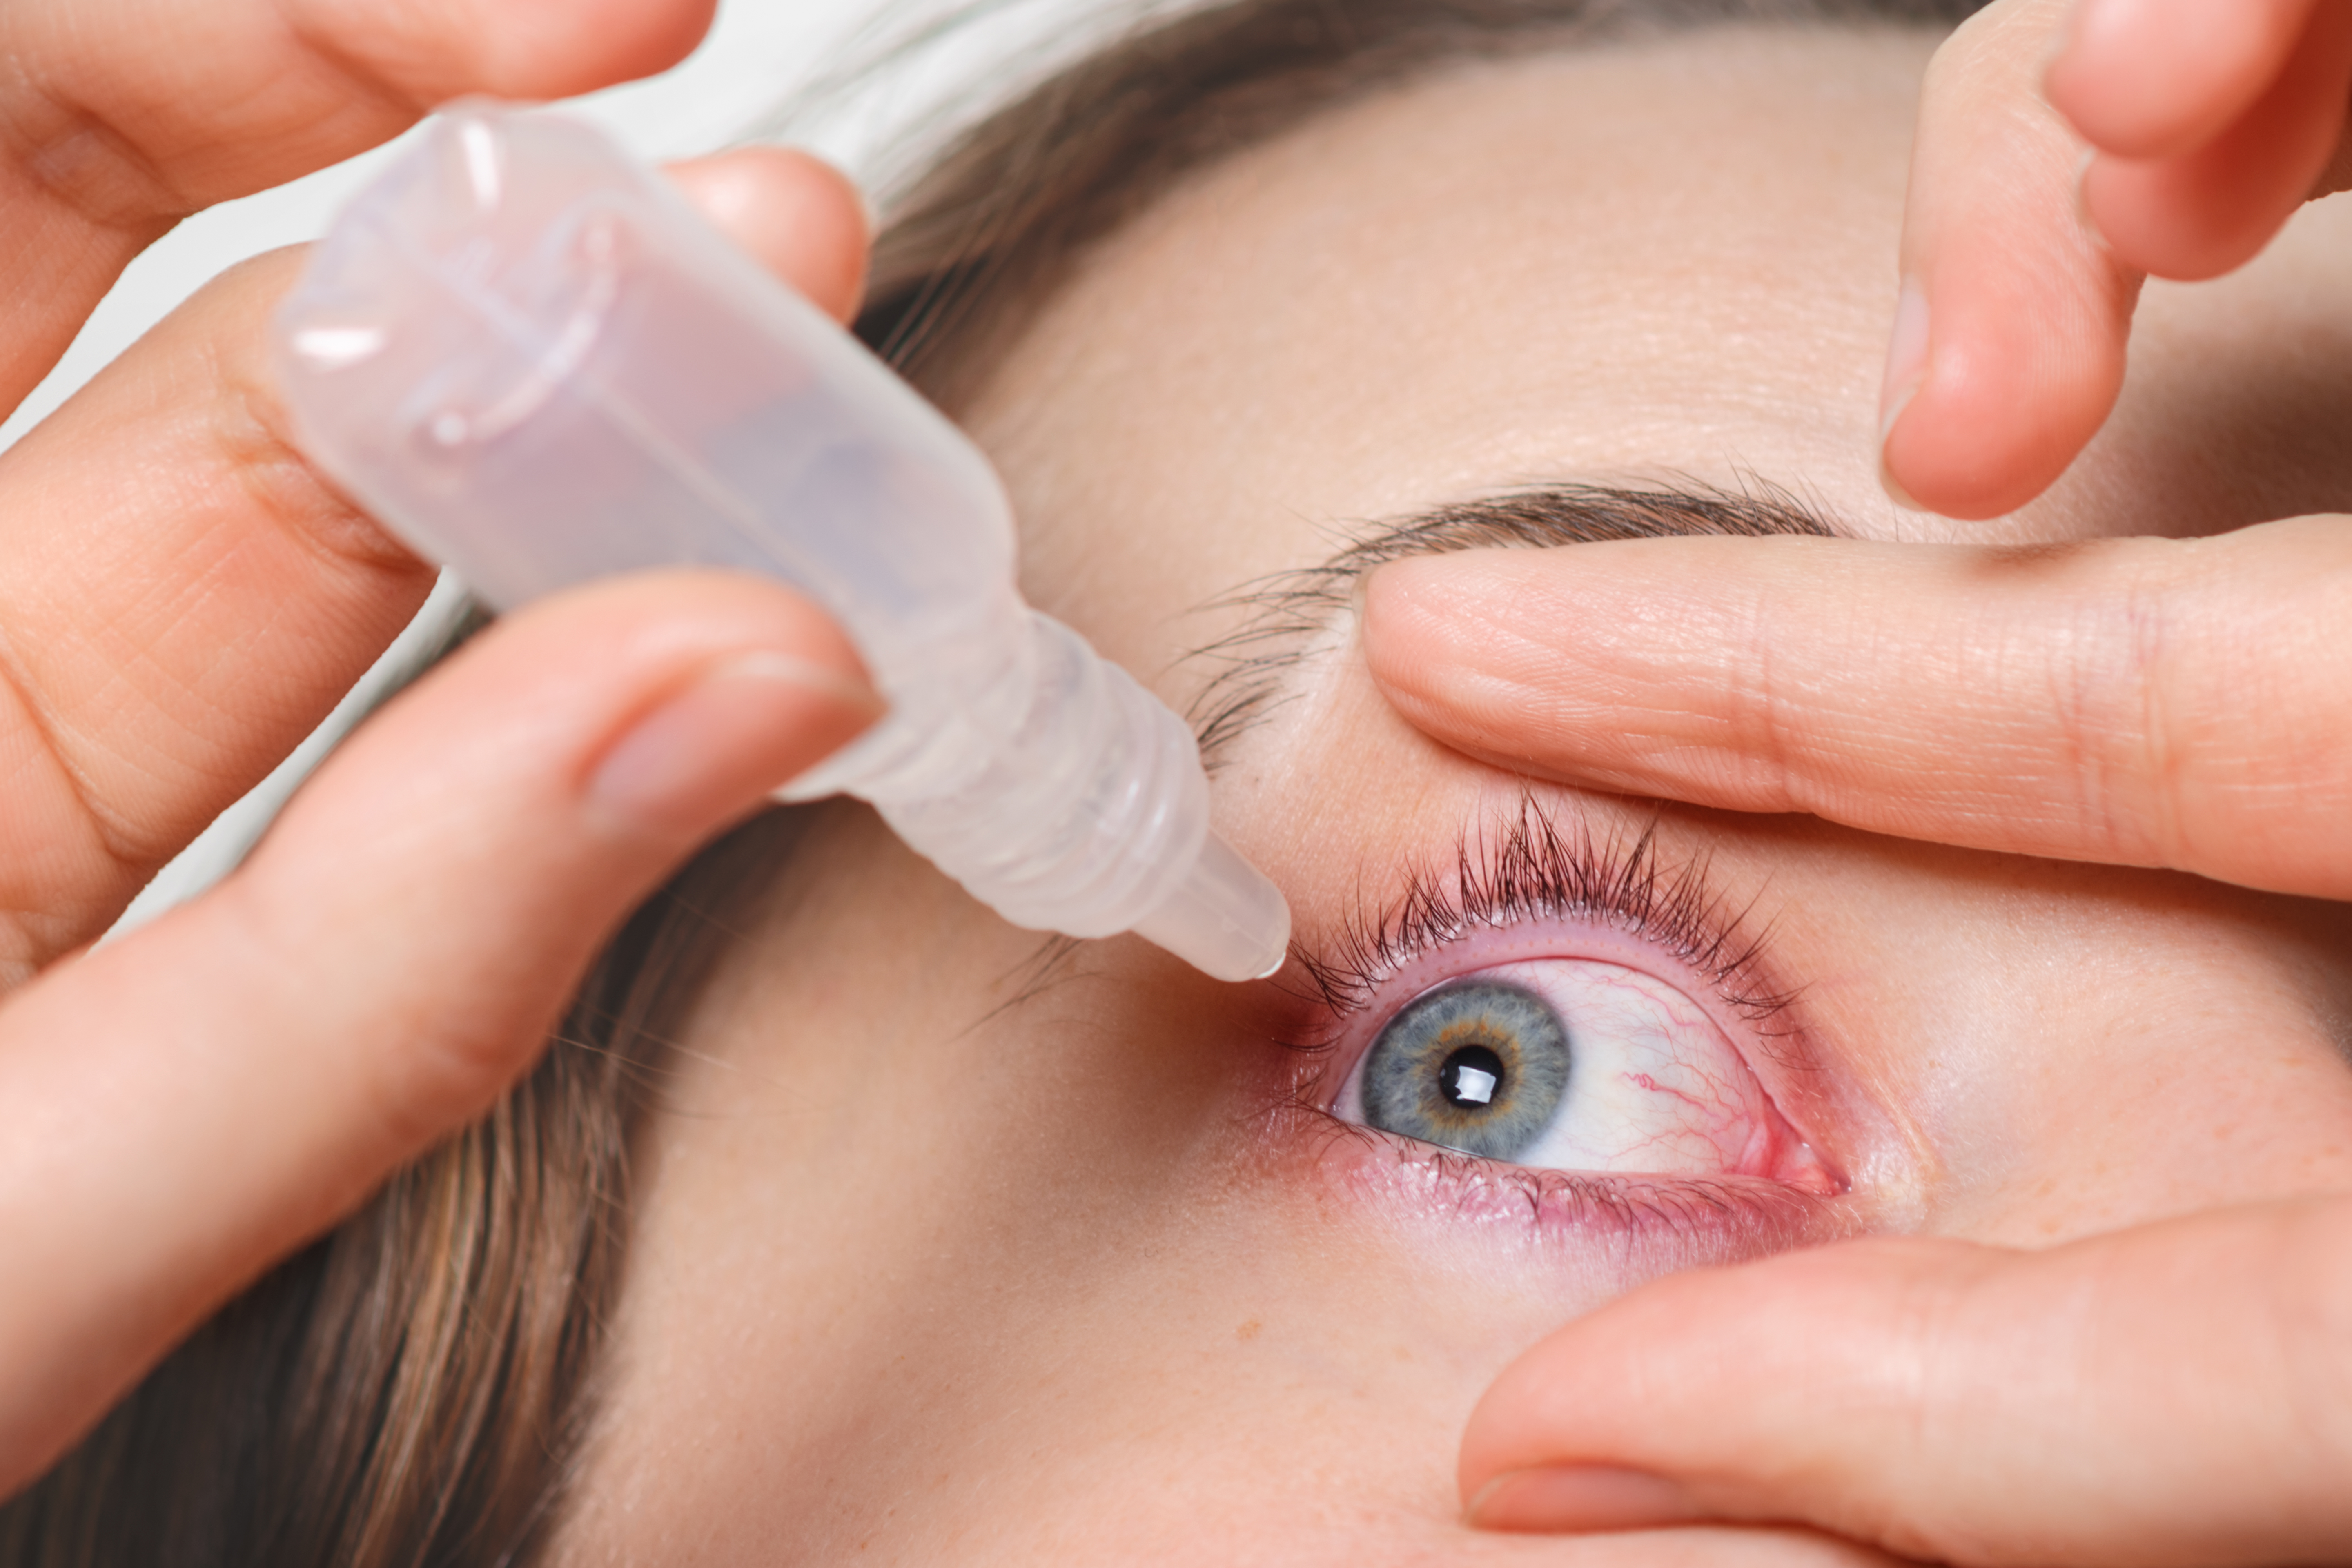 The risk of eye diseases increases after the age of forty